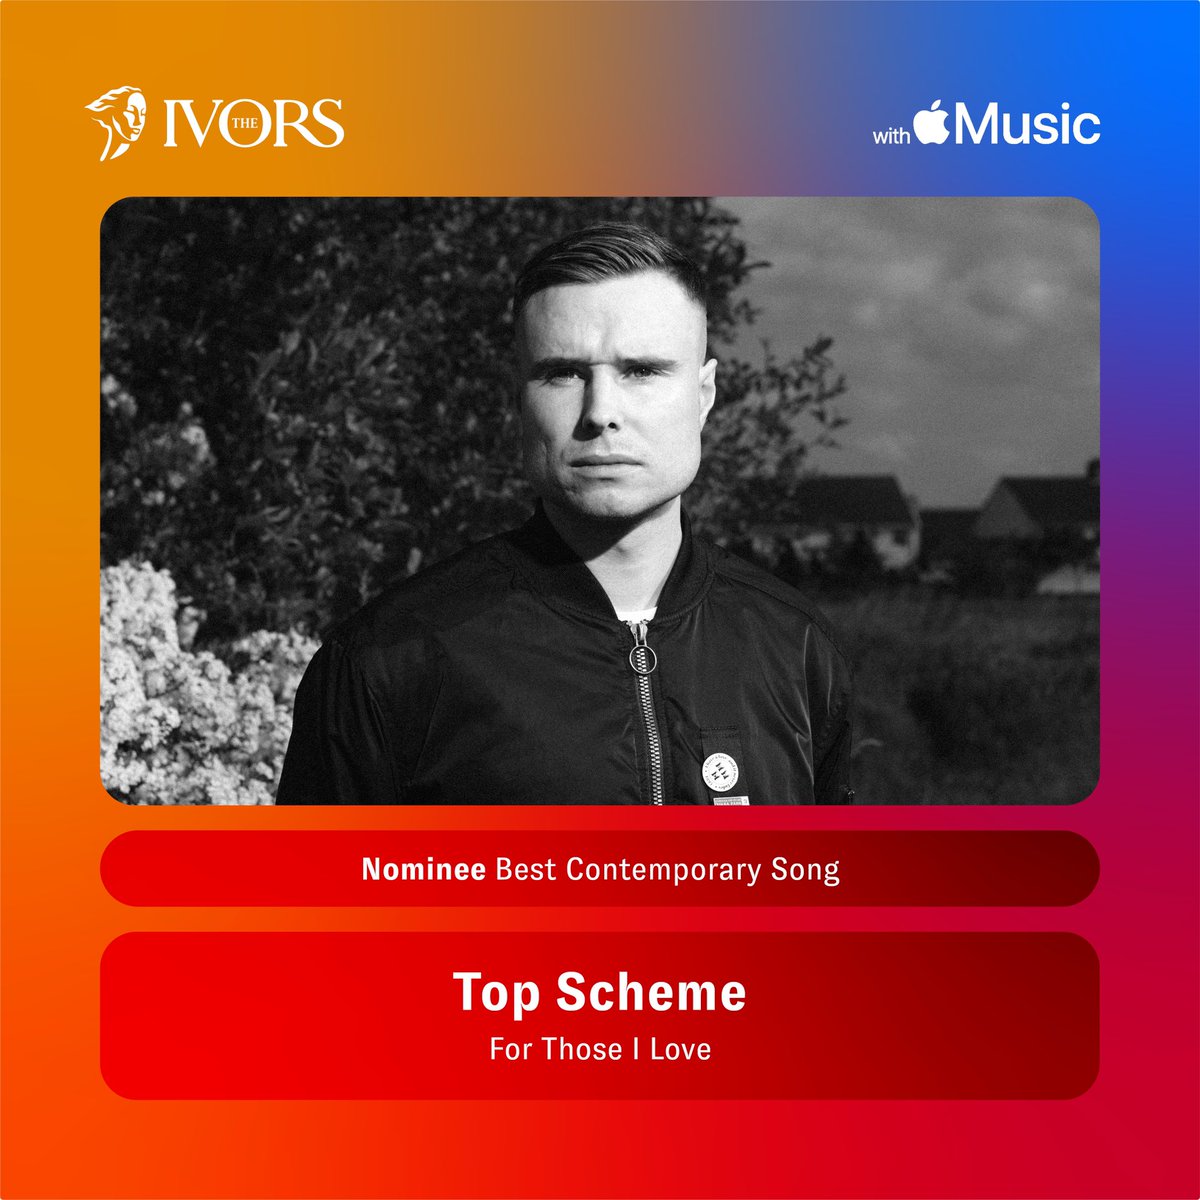 I've been nominated for Best Contemporary Song at the Ivor Novello Awards for Top Scheme. @IvorsAcademy As strange as it feels, I hold great pride in this, and seeing this kind of recognition for something I made in a shed is astounding. For my family, my friends, and for Paul.